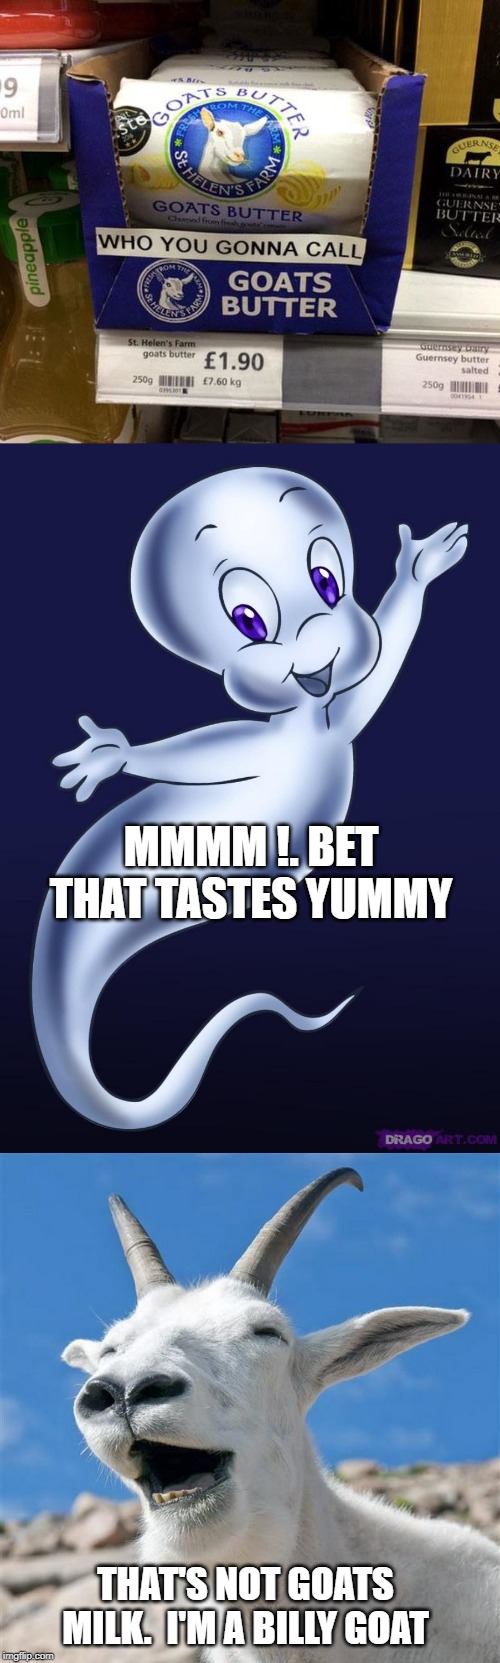 unique flavour | MMMM !. BET THAT TASTES YUMMY; THAT'S NOT GOATS MILK.  I'M A BILLY GOAT | image tagged in memes,laughing goat,casper the friendly ghost,butter | made w/ Imgflip meme maker